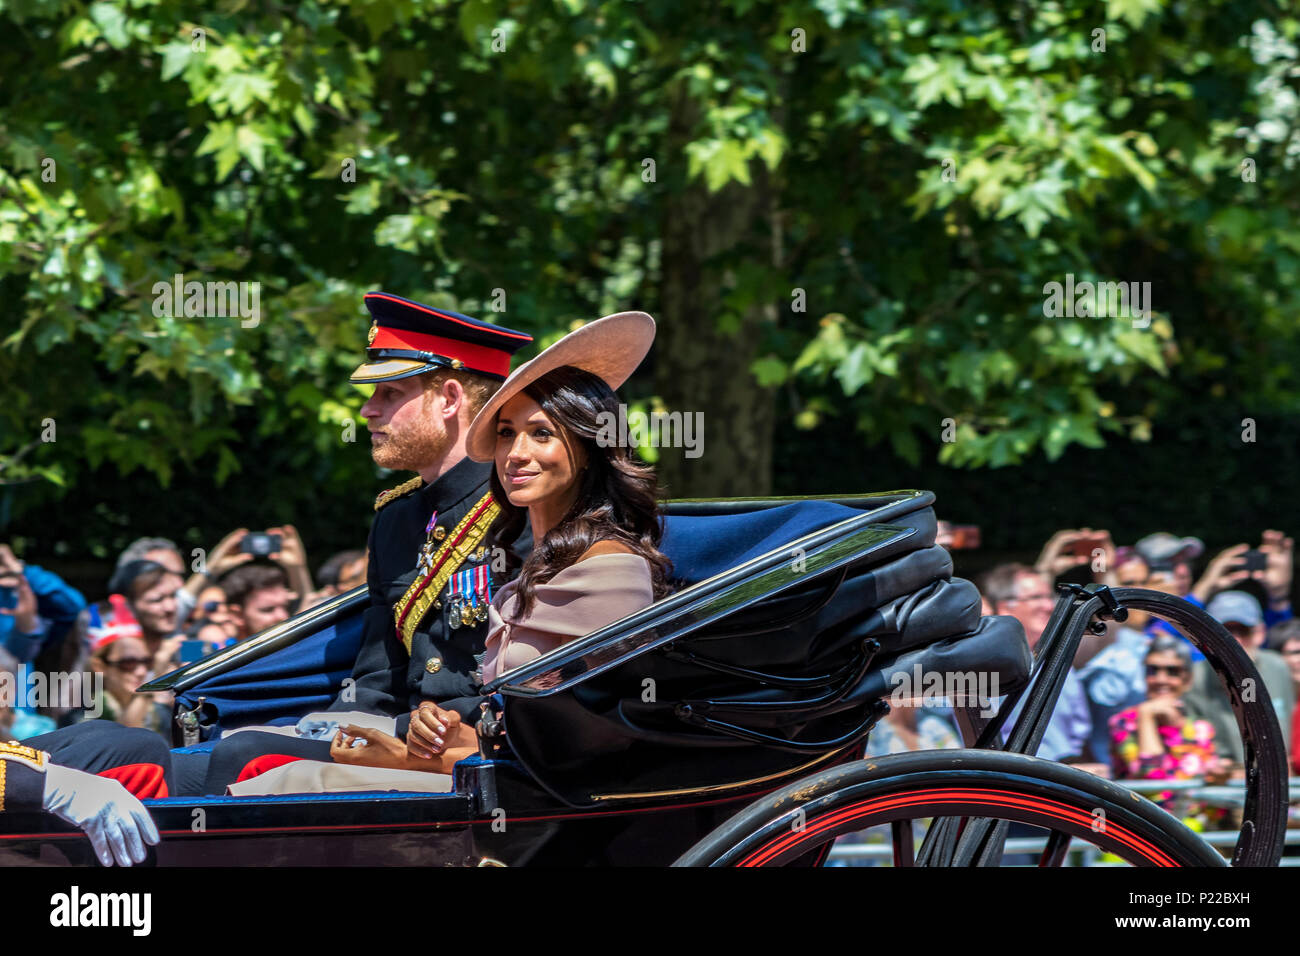 Prince Harry, The Duke of Sussex and Meghan Markle, The Duchess Of Sussex, ride together in a carriage at The Trooping Of The Colour  London,UK , 2018 Stock Photo